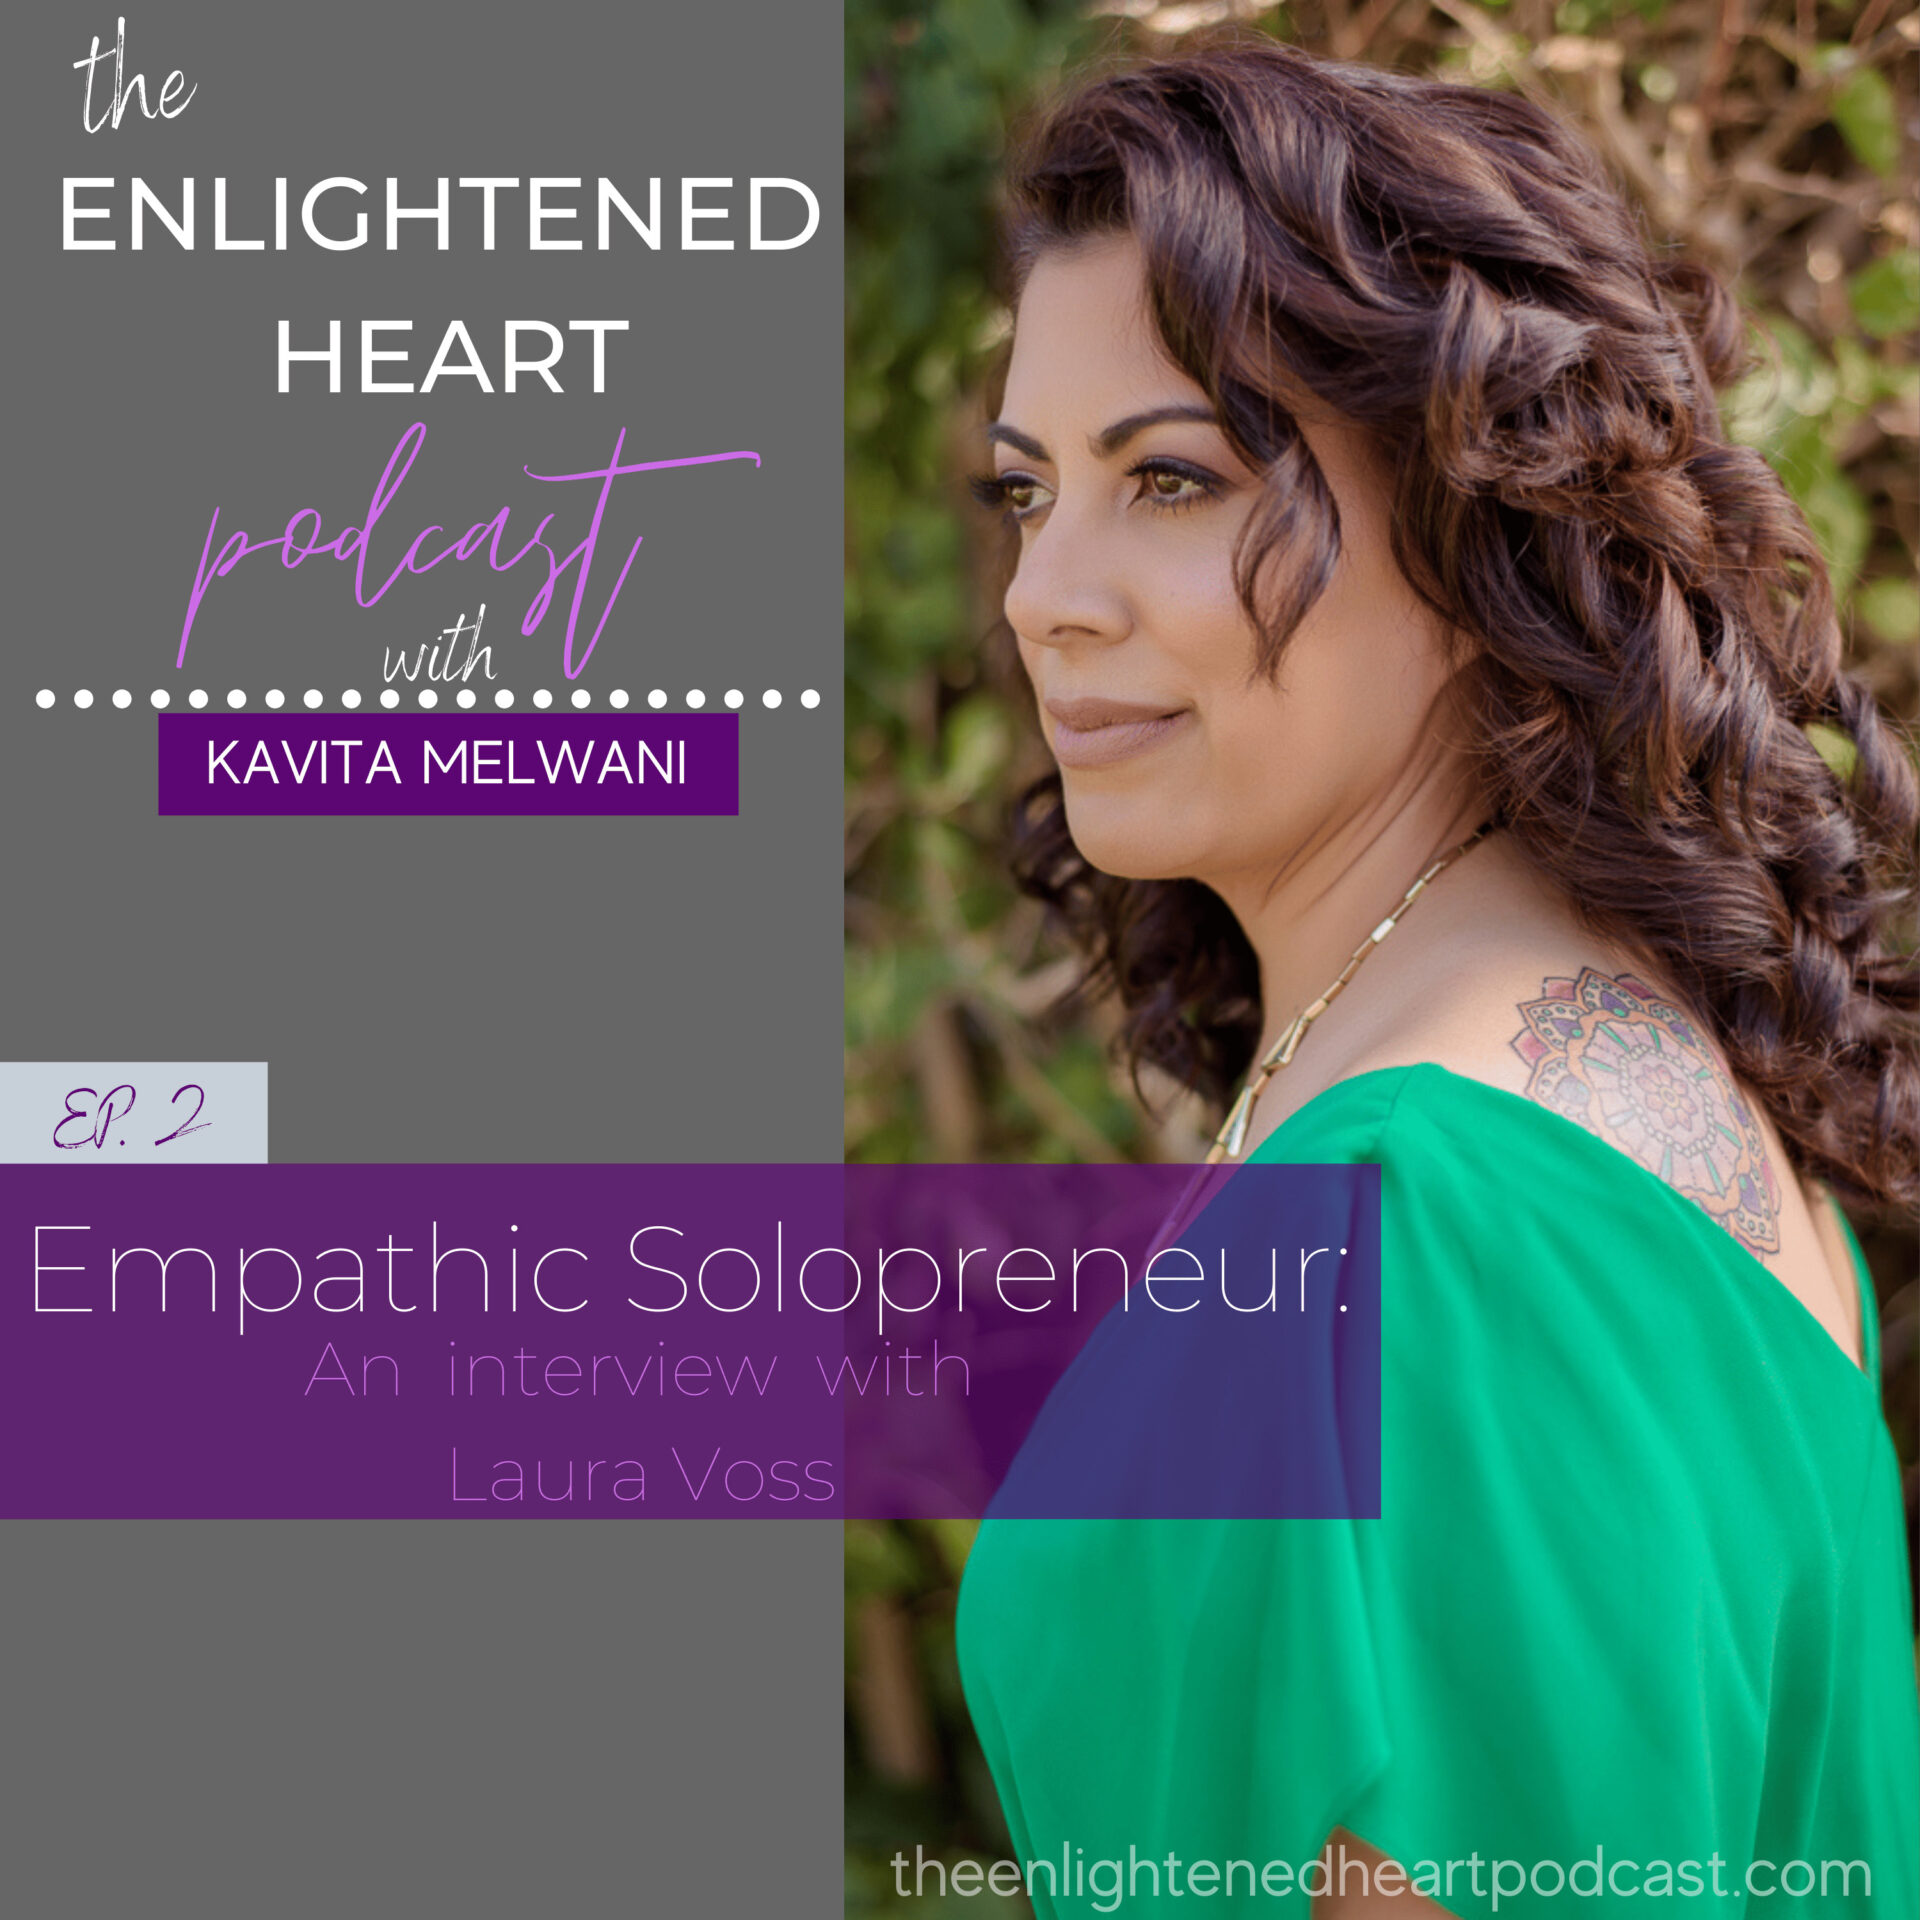 Empathic Solopreneur: An interview with Laura Voss